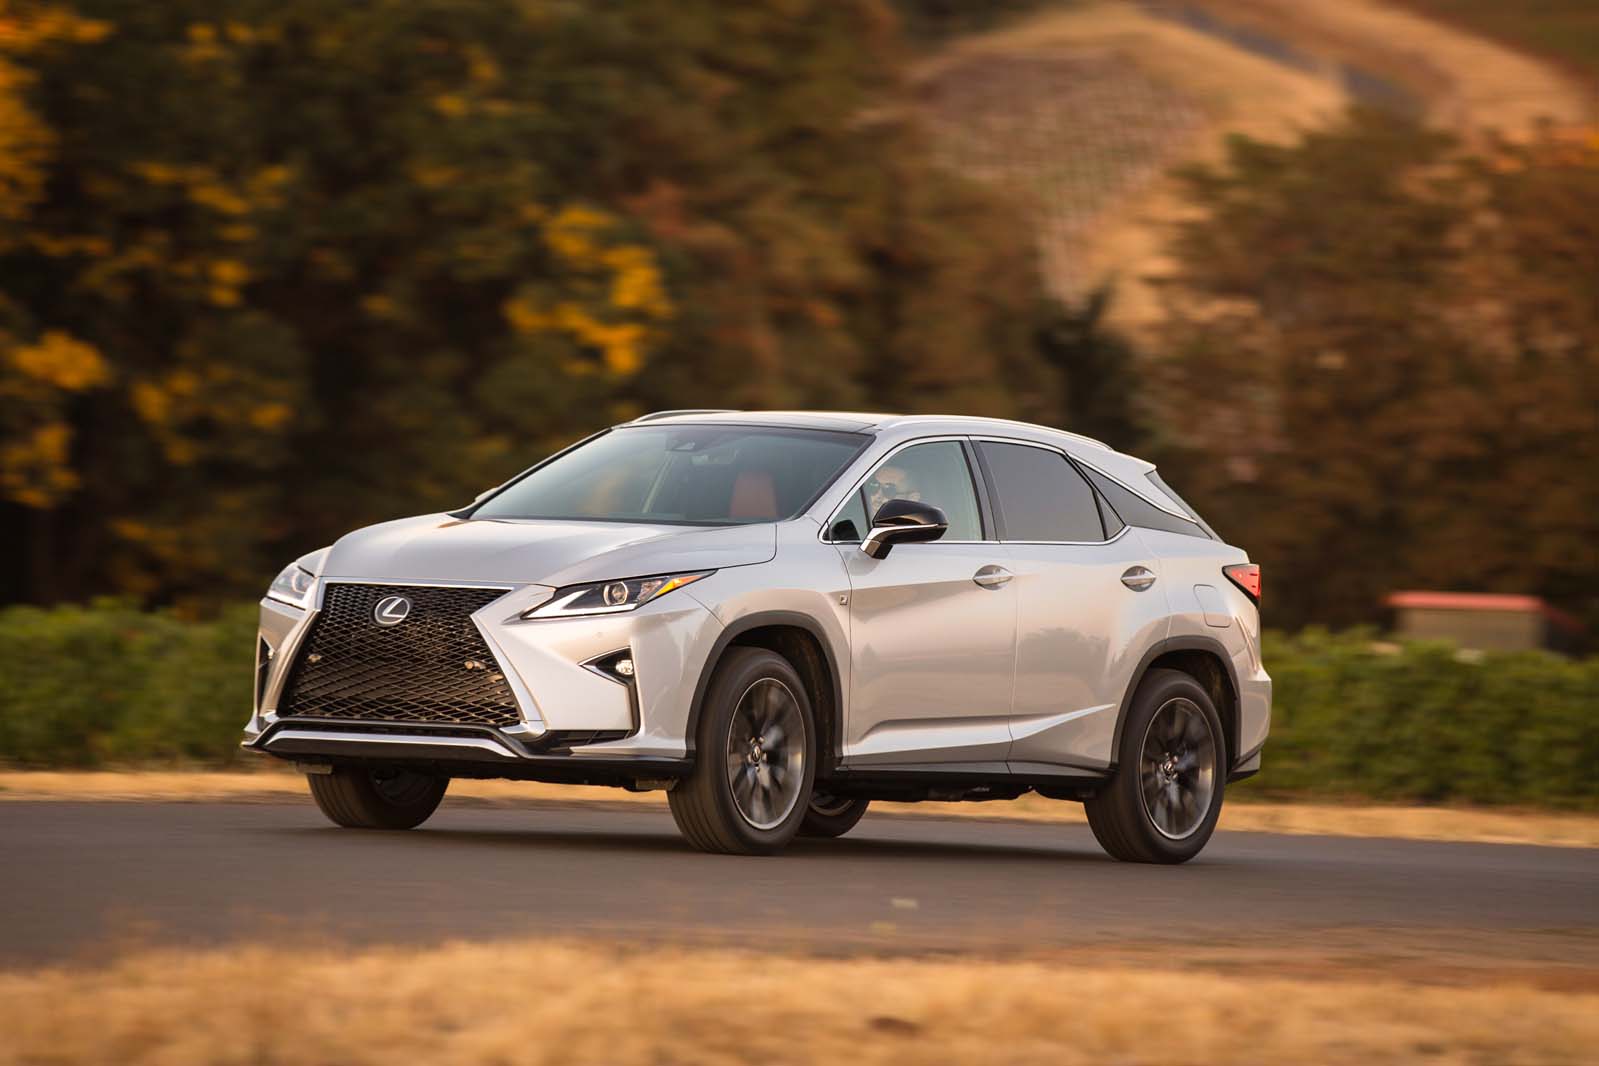 2016 Lexus RX 350 AWD F Sport Full Gallery and